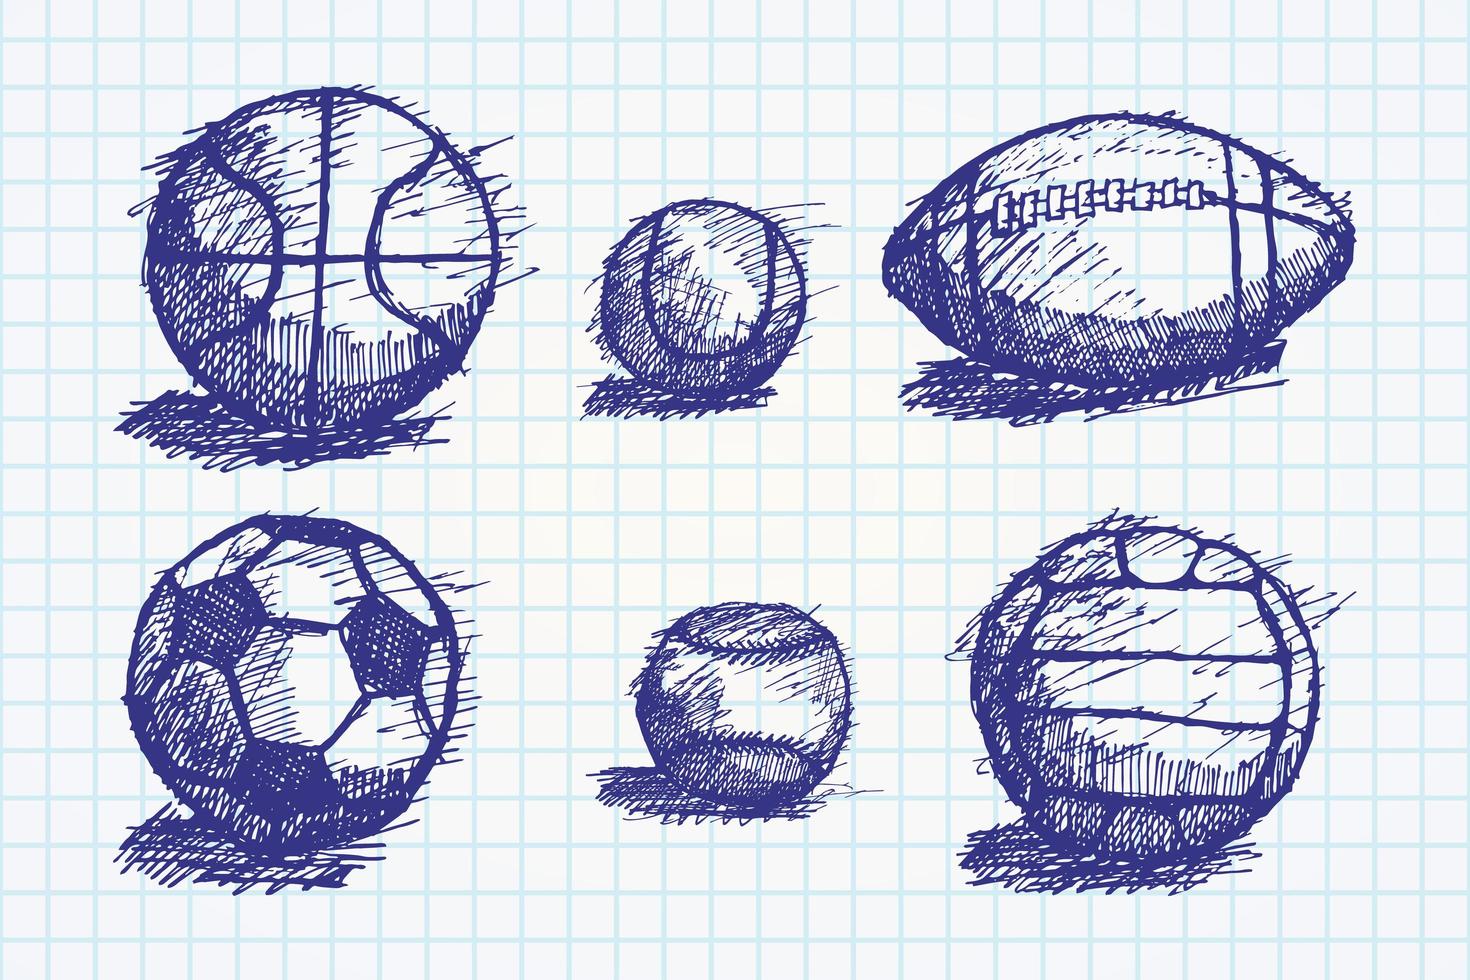 Ball sketch set with shadow on the ground vector